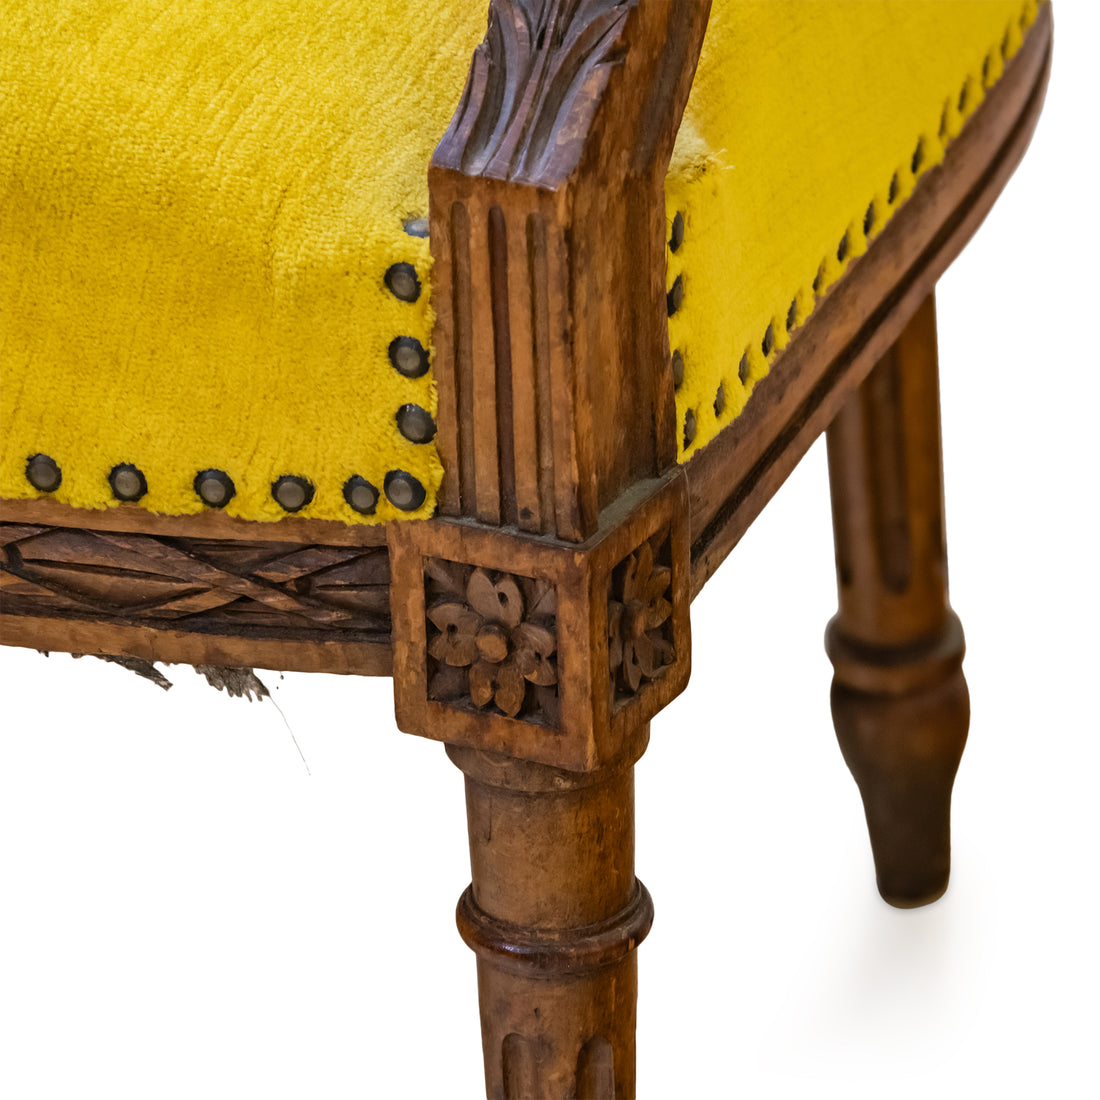 Vintage Louis XVI Style Settee with Gold Velvet Upholstery